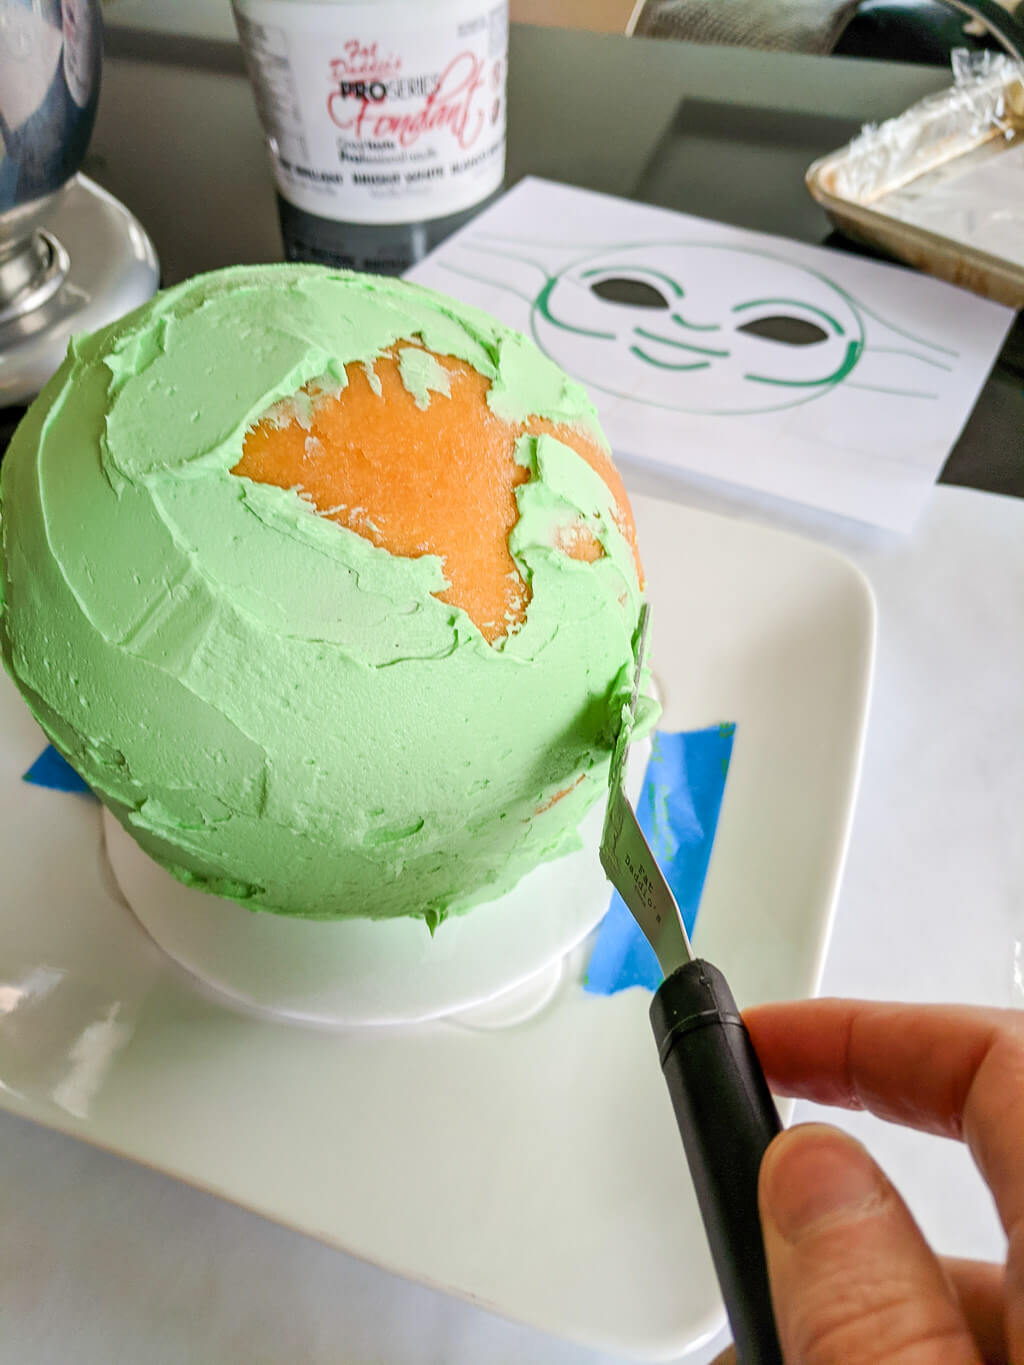 Icing buttercream frosting onto a dome ball sphere cake